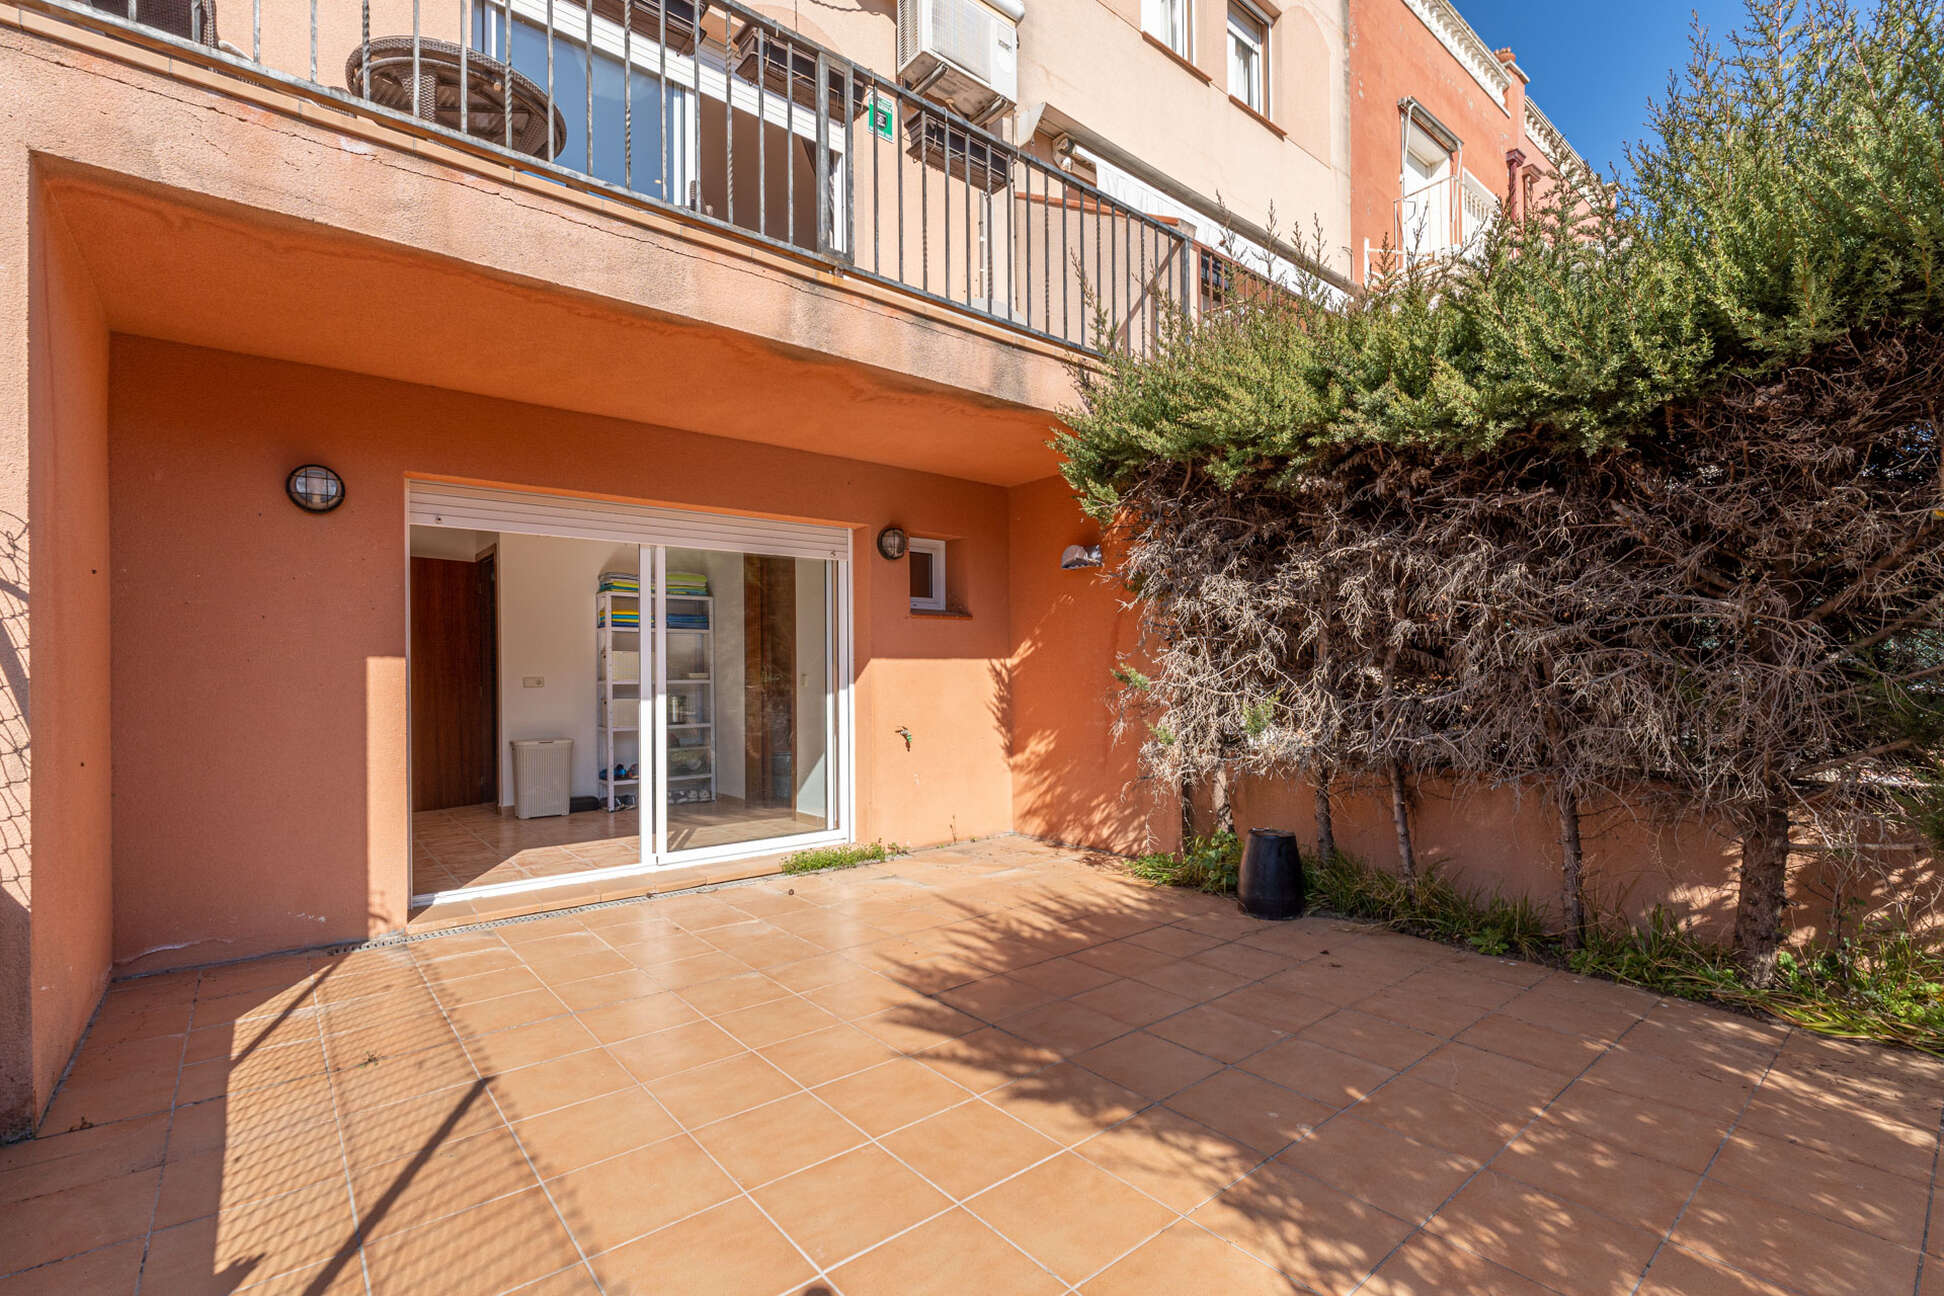 House for sale 150 m from the beach of Empuriabrava